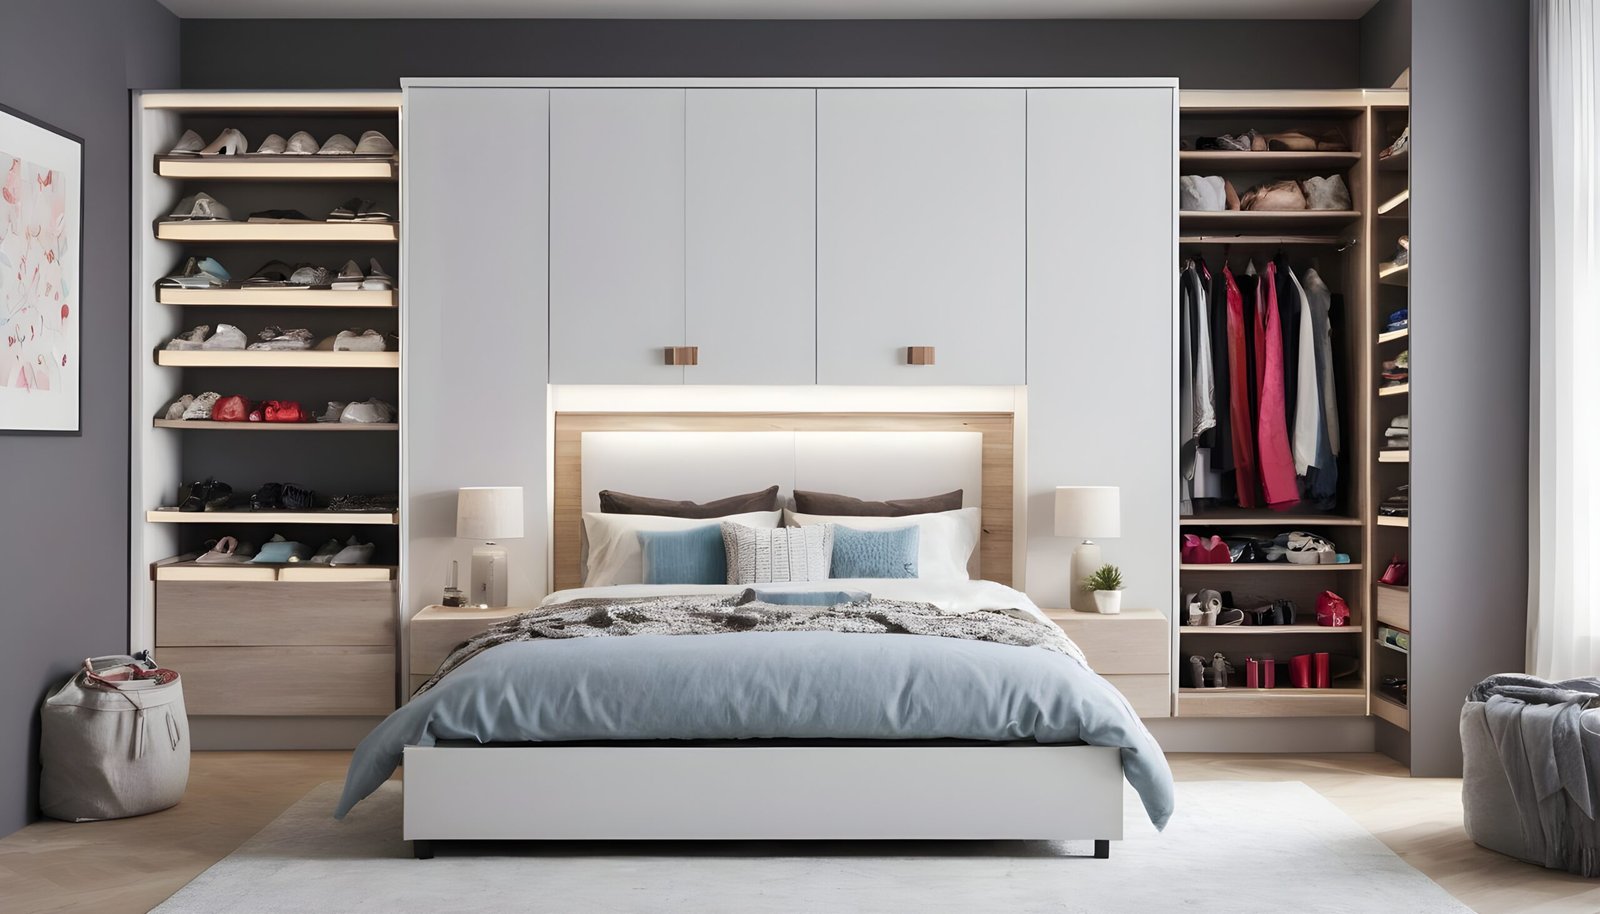 A bedroom featuring clever over-bed storage solutions.